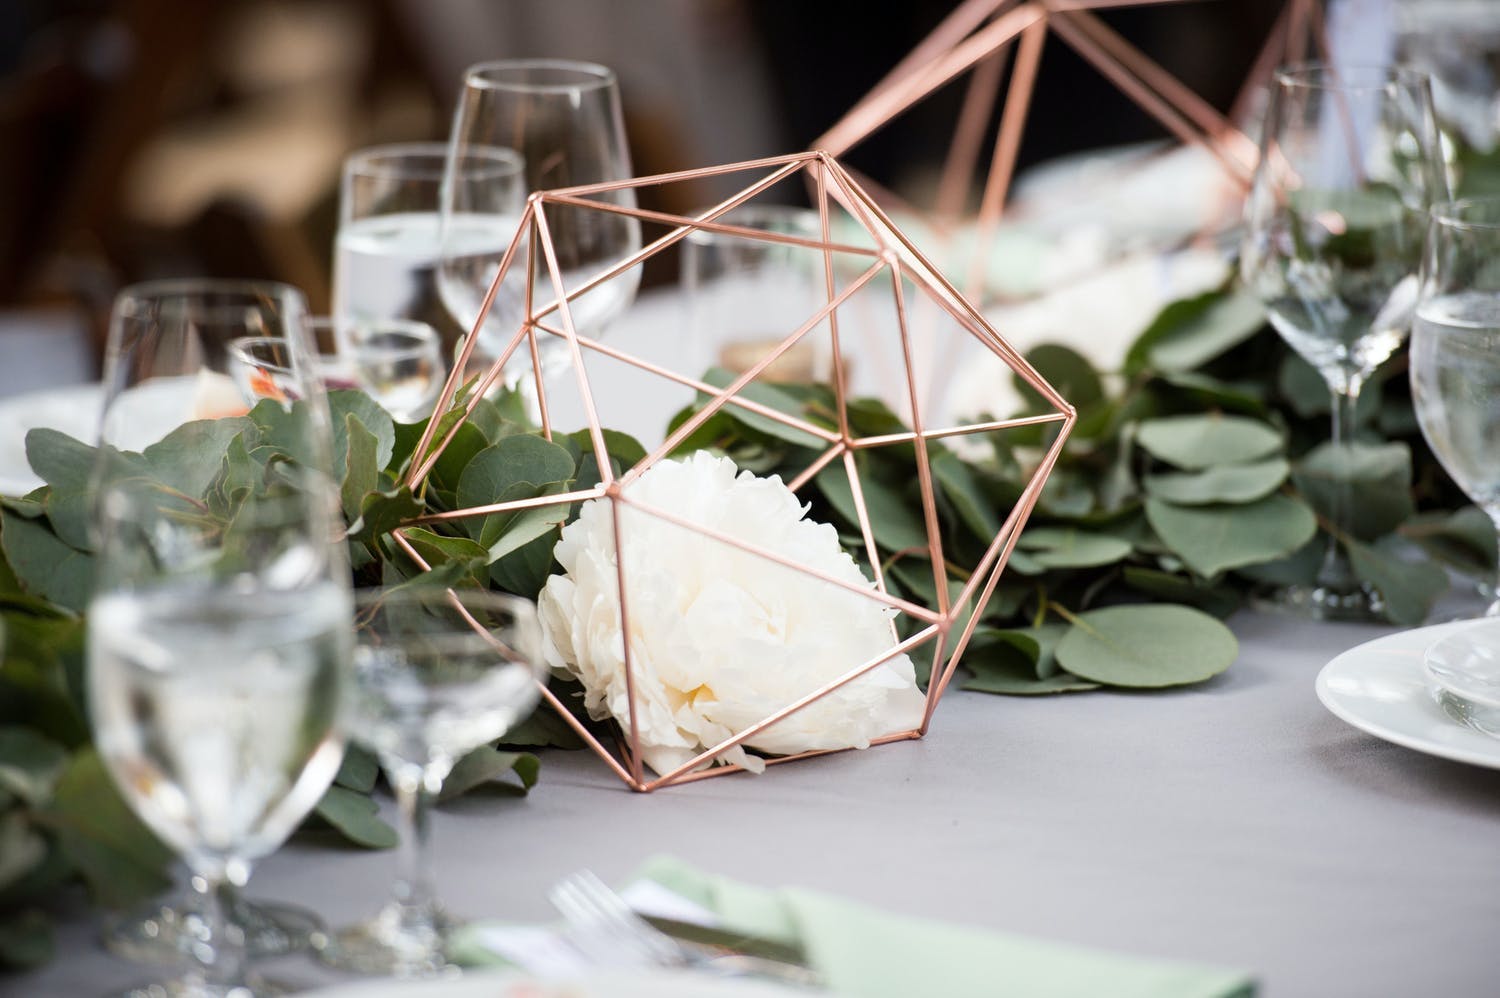 Rustic Wedding Centerpieces With Greenery Garland and Copper Geometric Structures | PartySlate